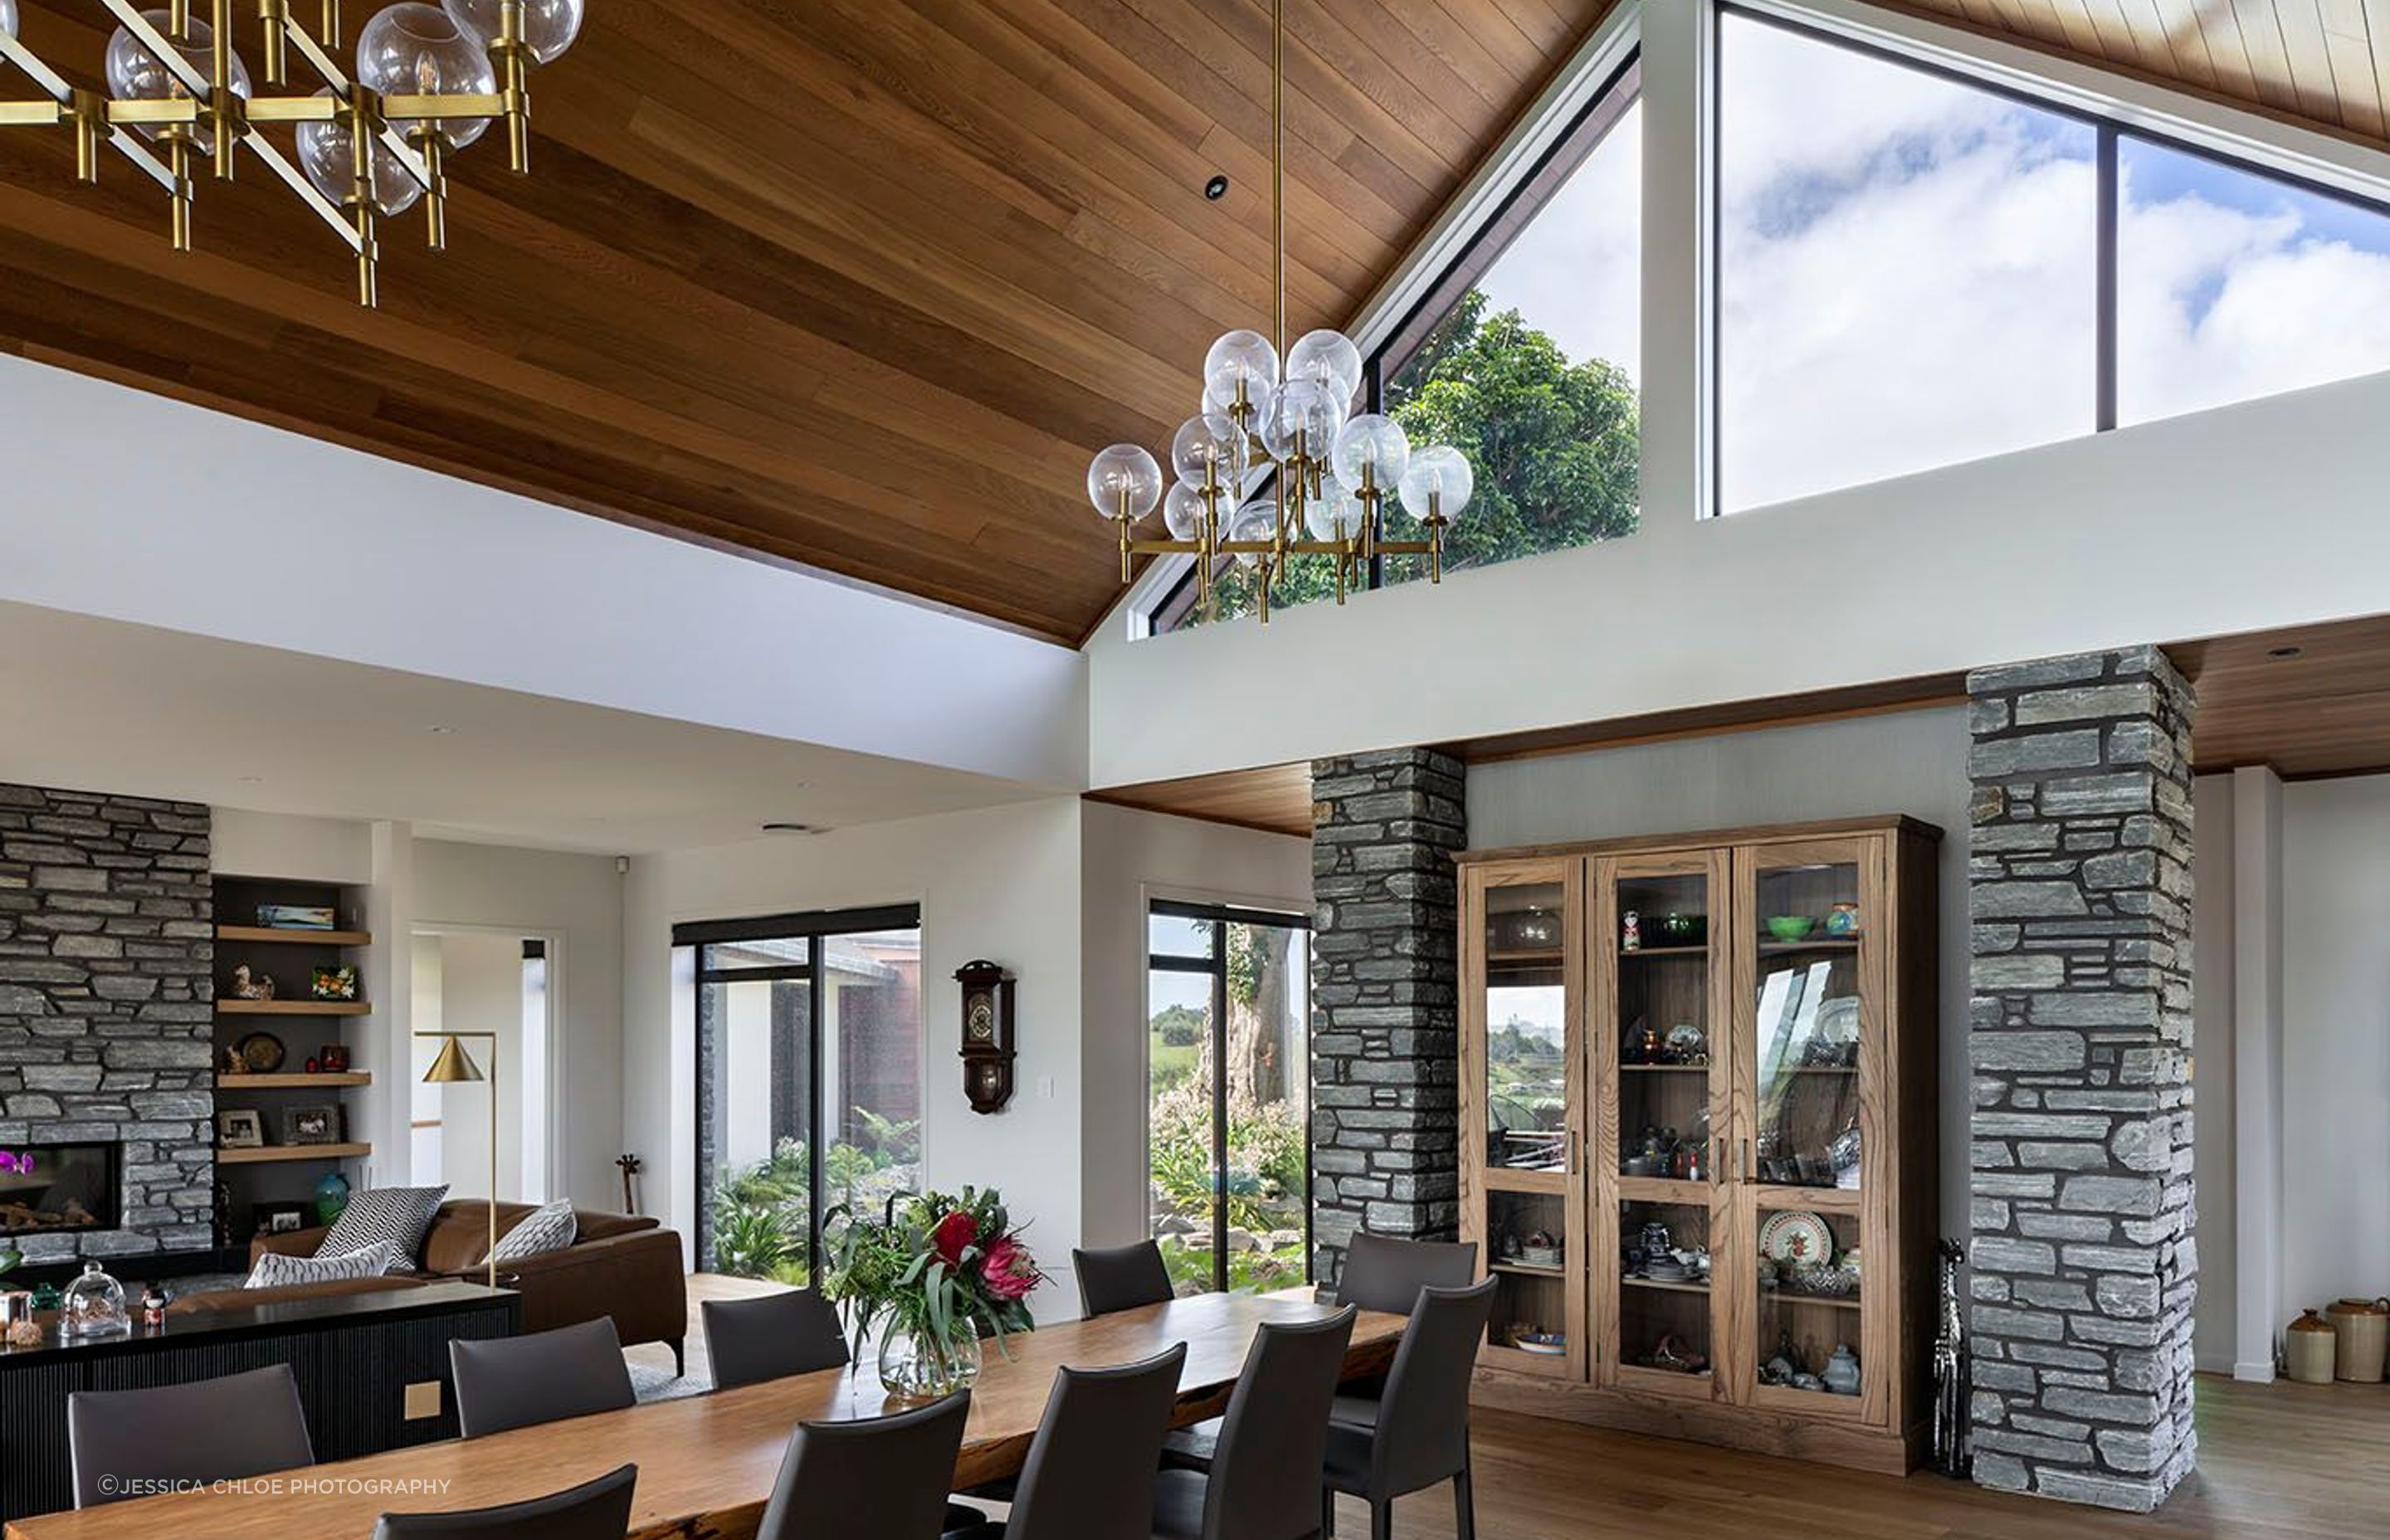 View from the kitchen island via the vaulted ceiling to the puriri tree at the entry.